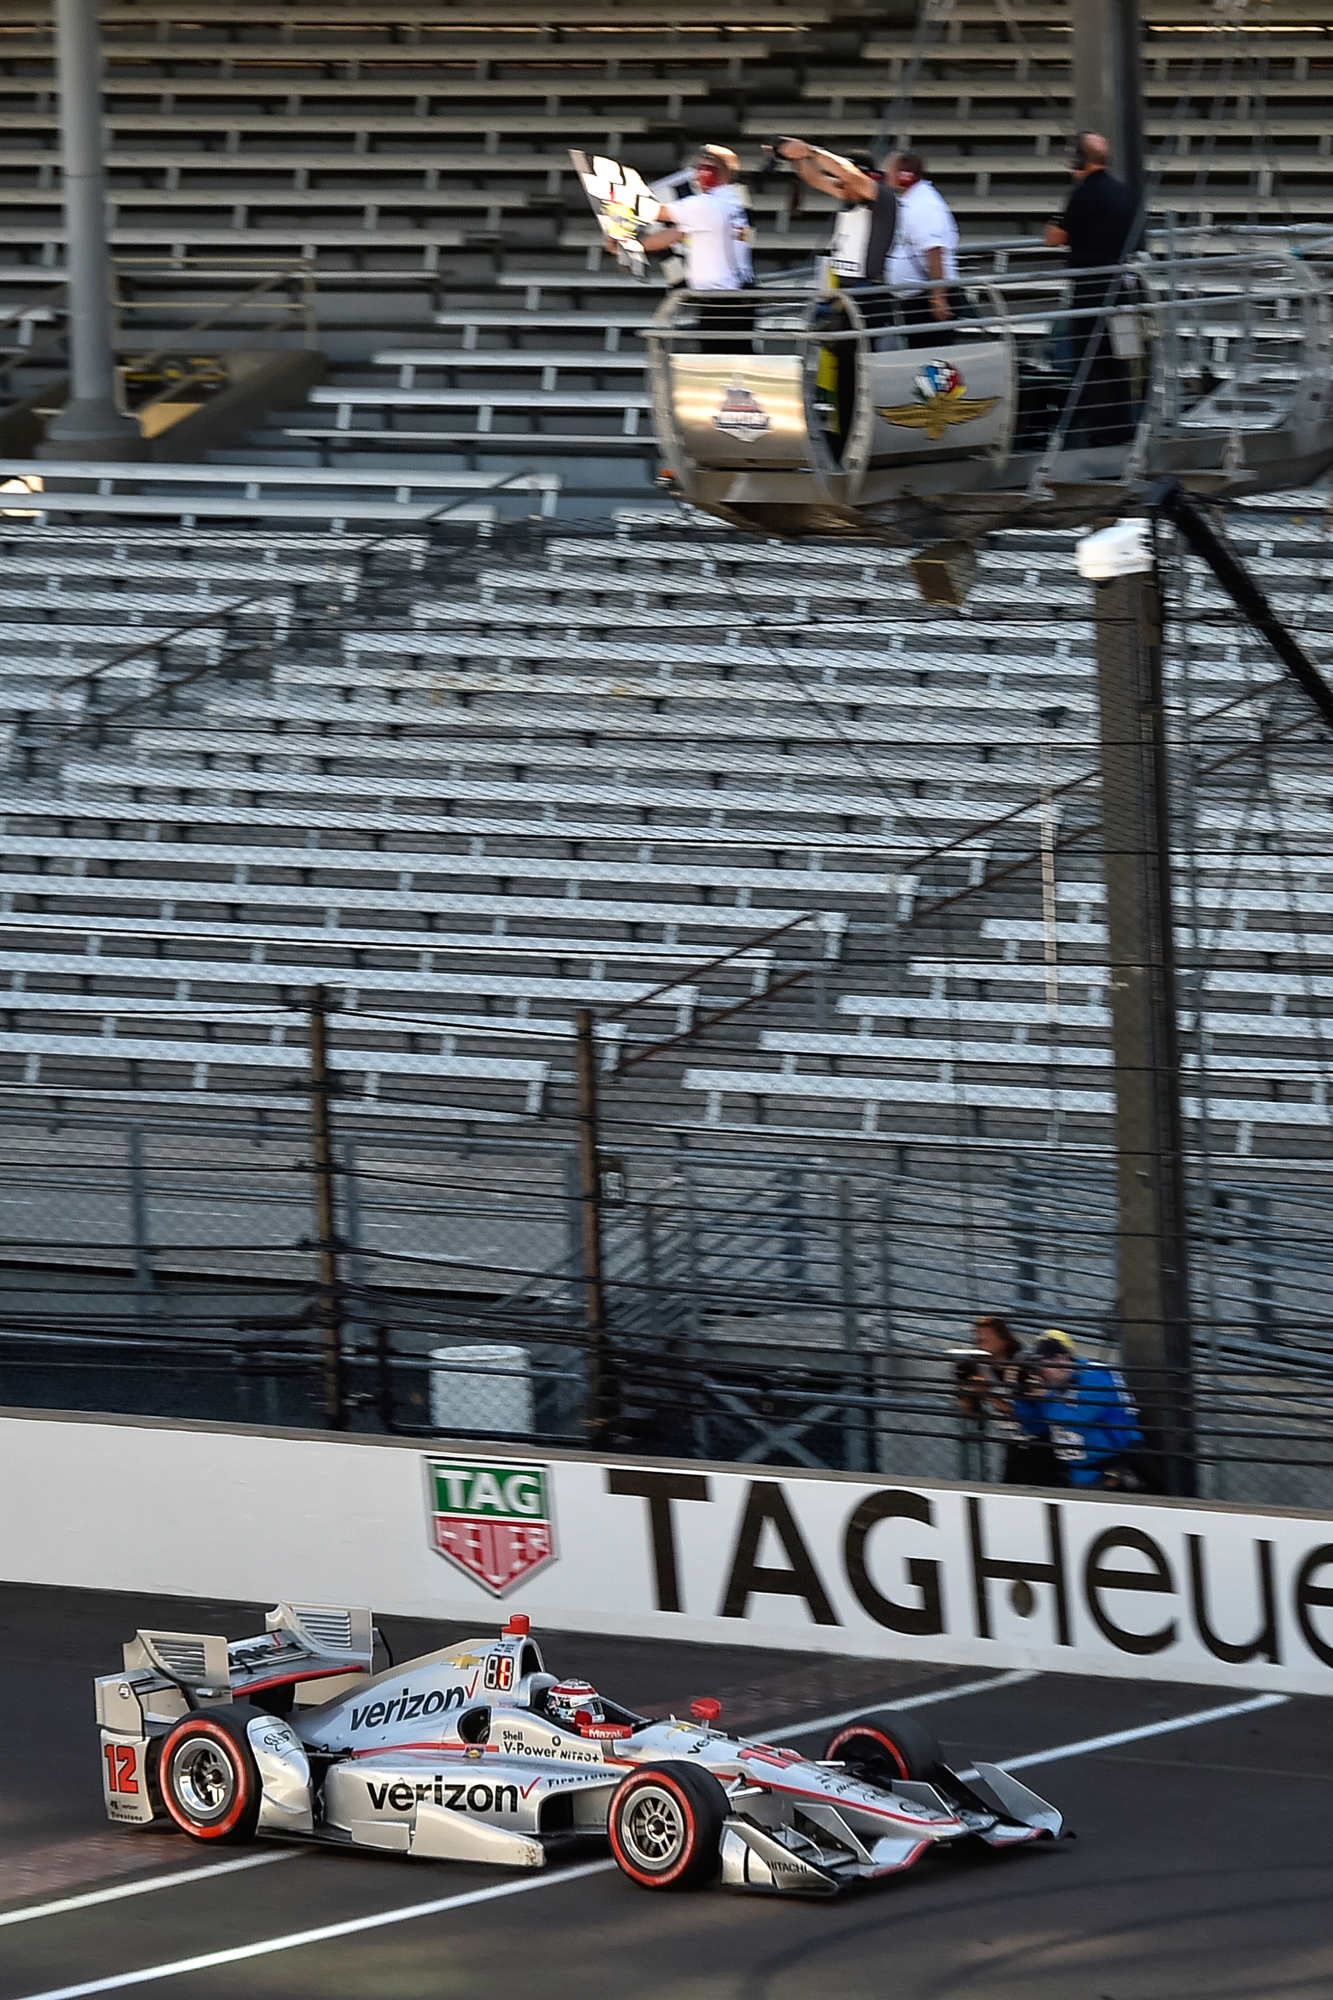 Grandstand shots like this underscore what a loser the GP of IndyCar is to the casual observer